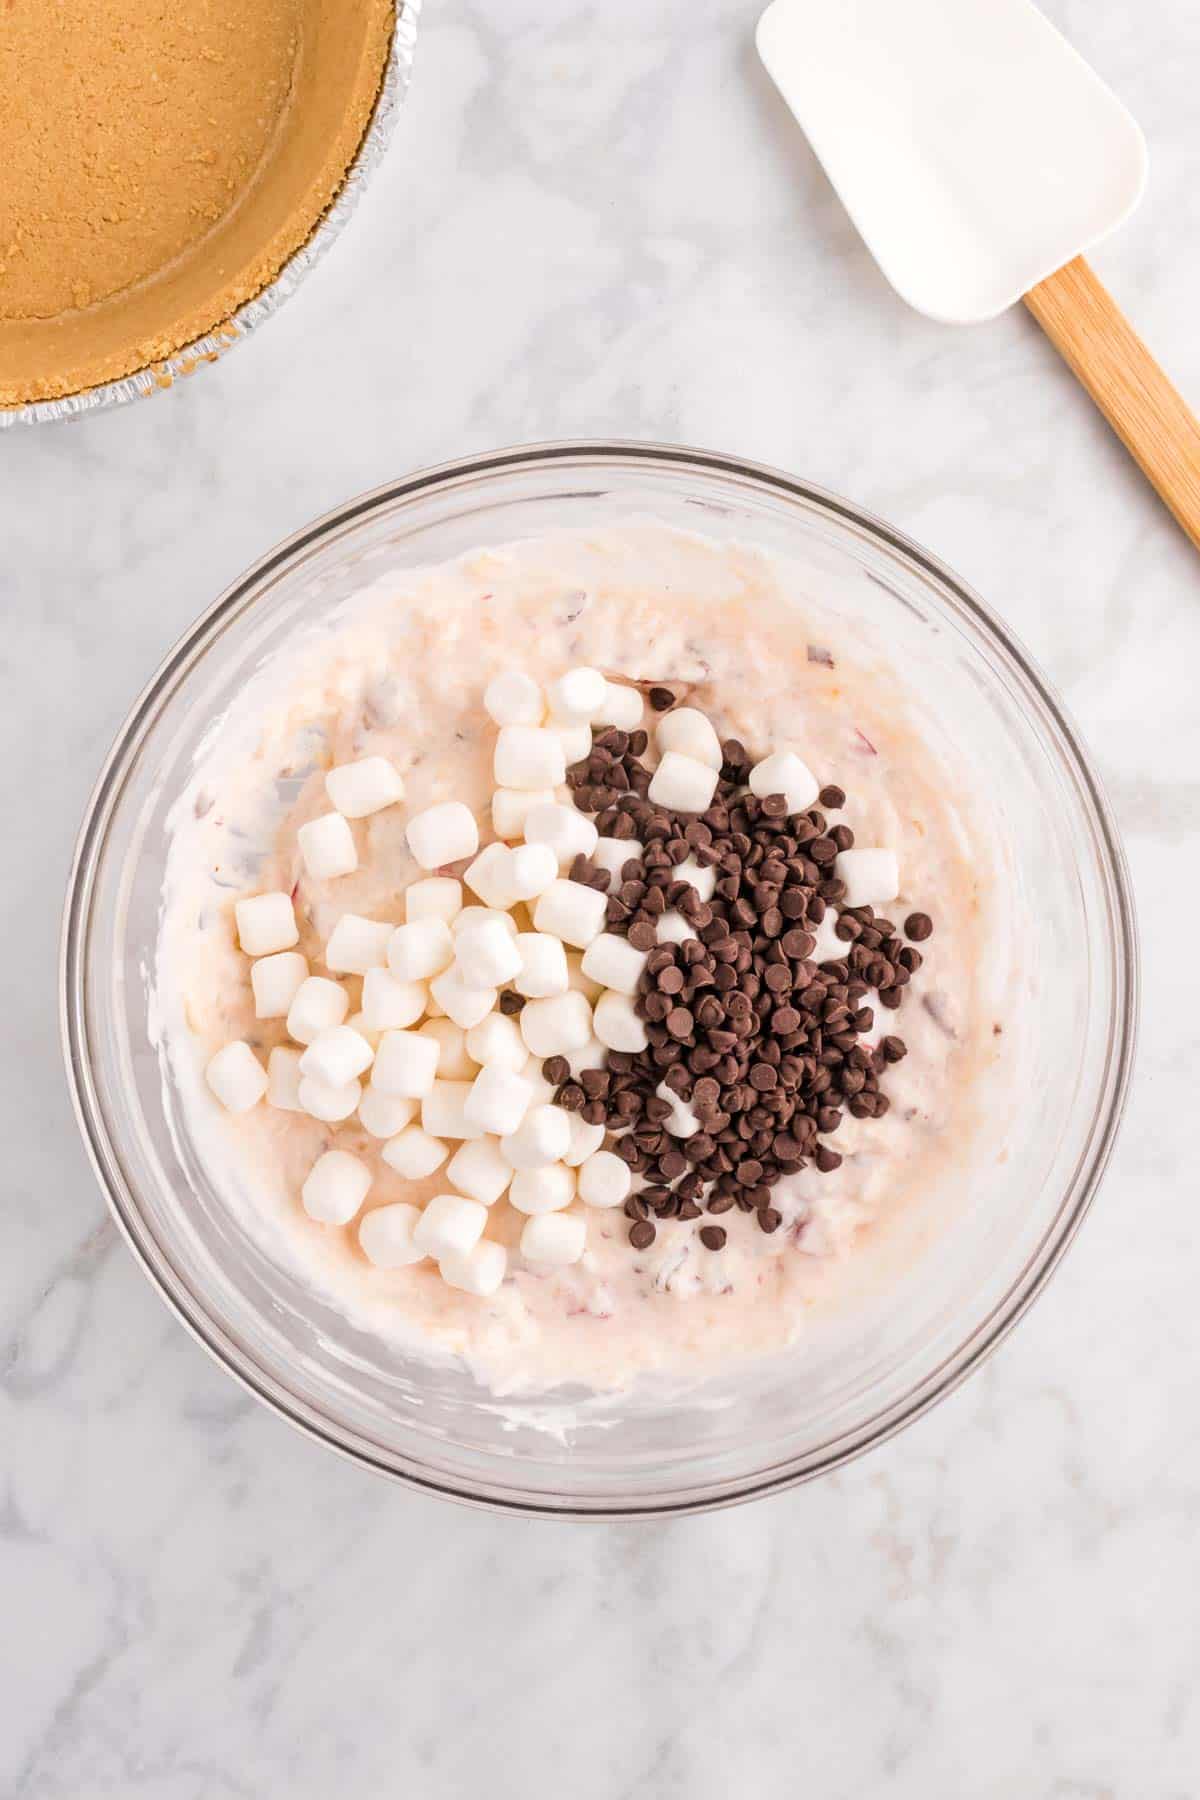 mini marshmallows and mini chocolate chips on top of creamy mixture in a bowl